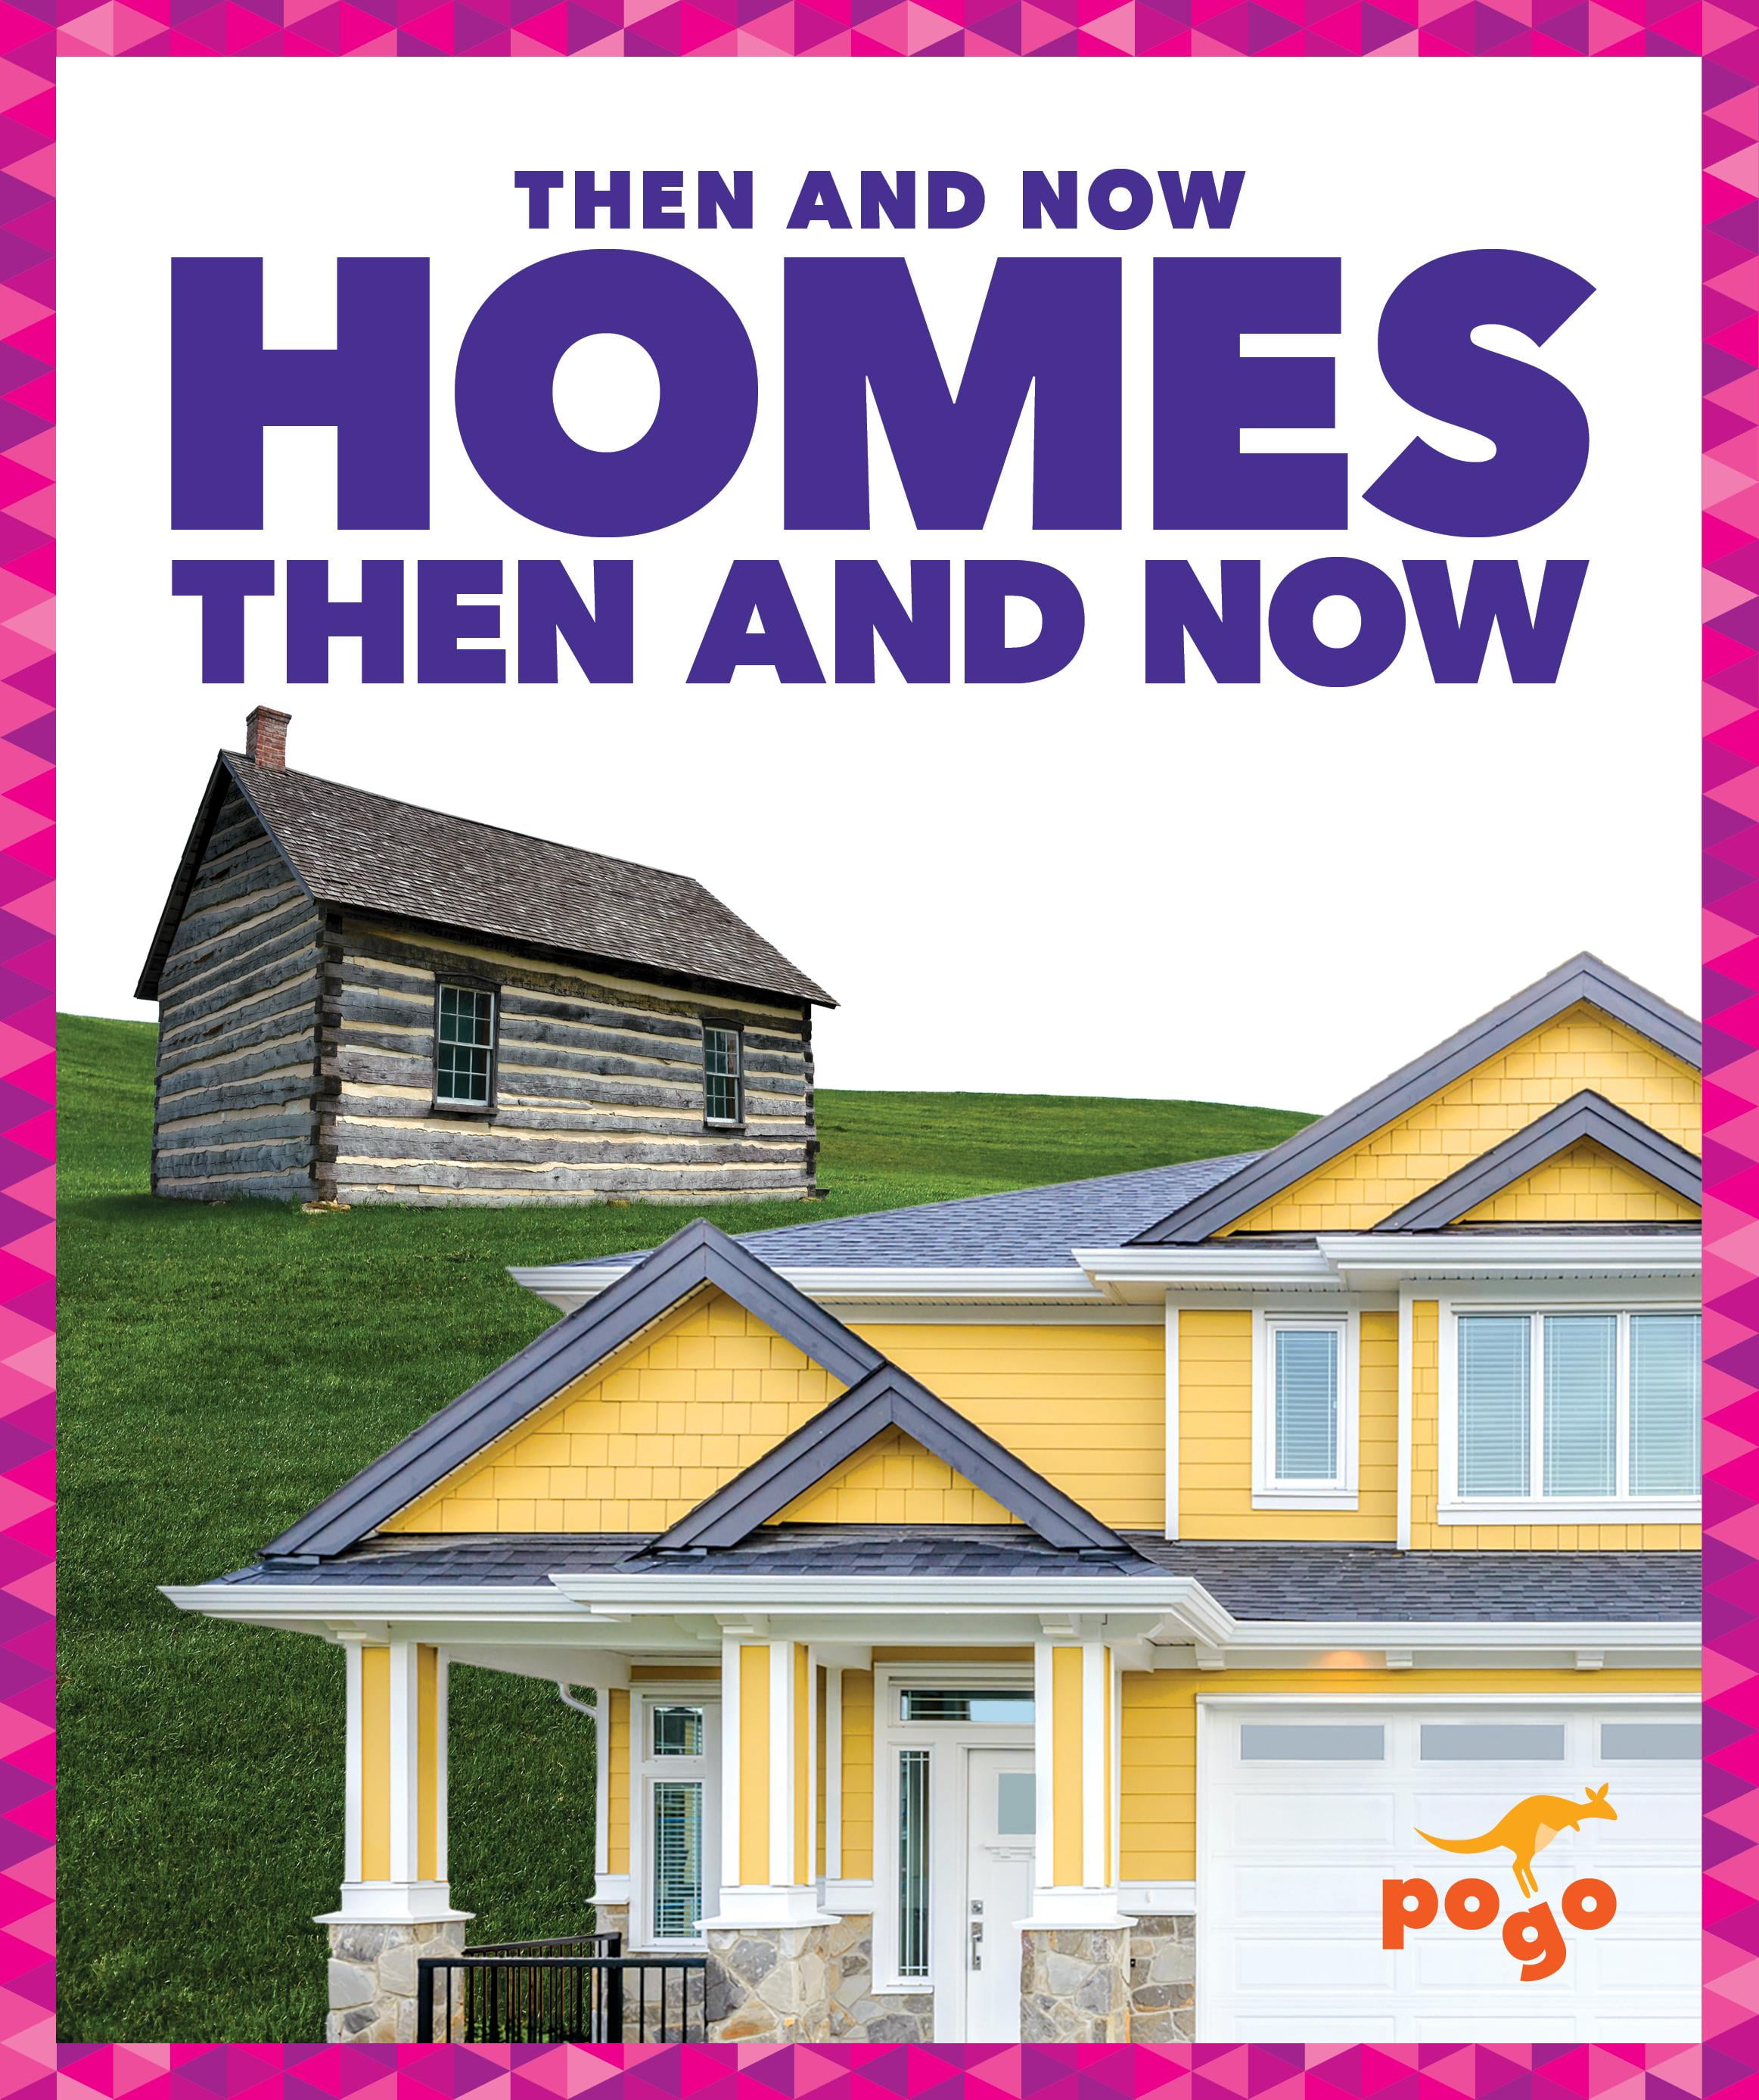 Homes Then and Now